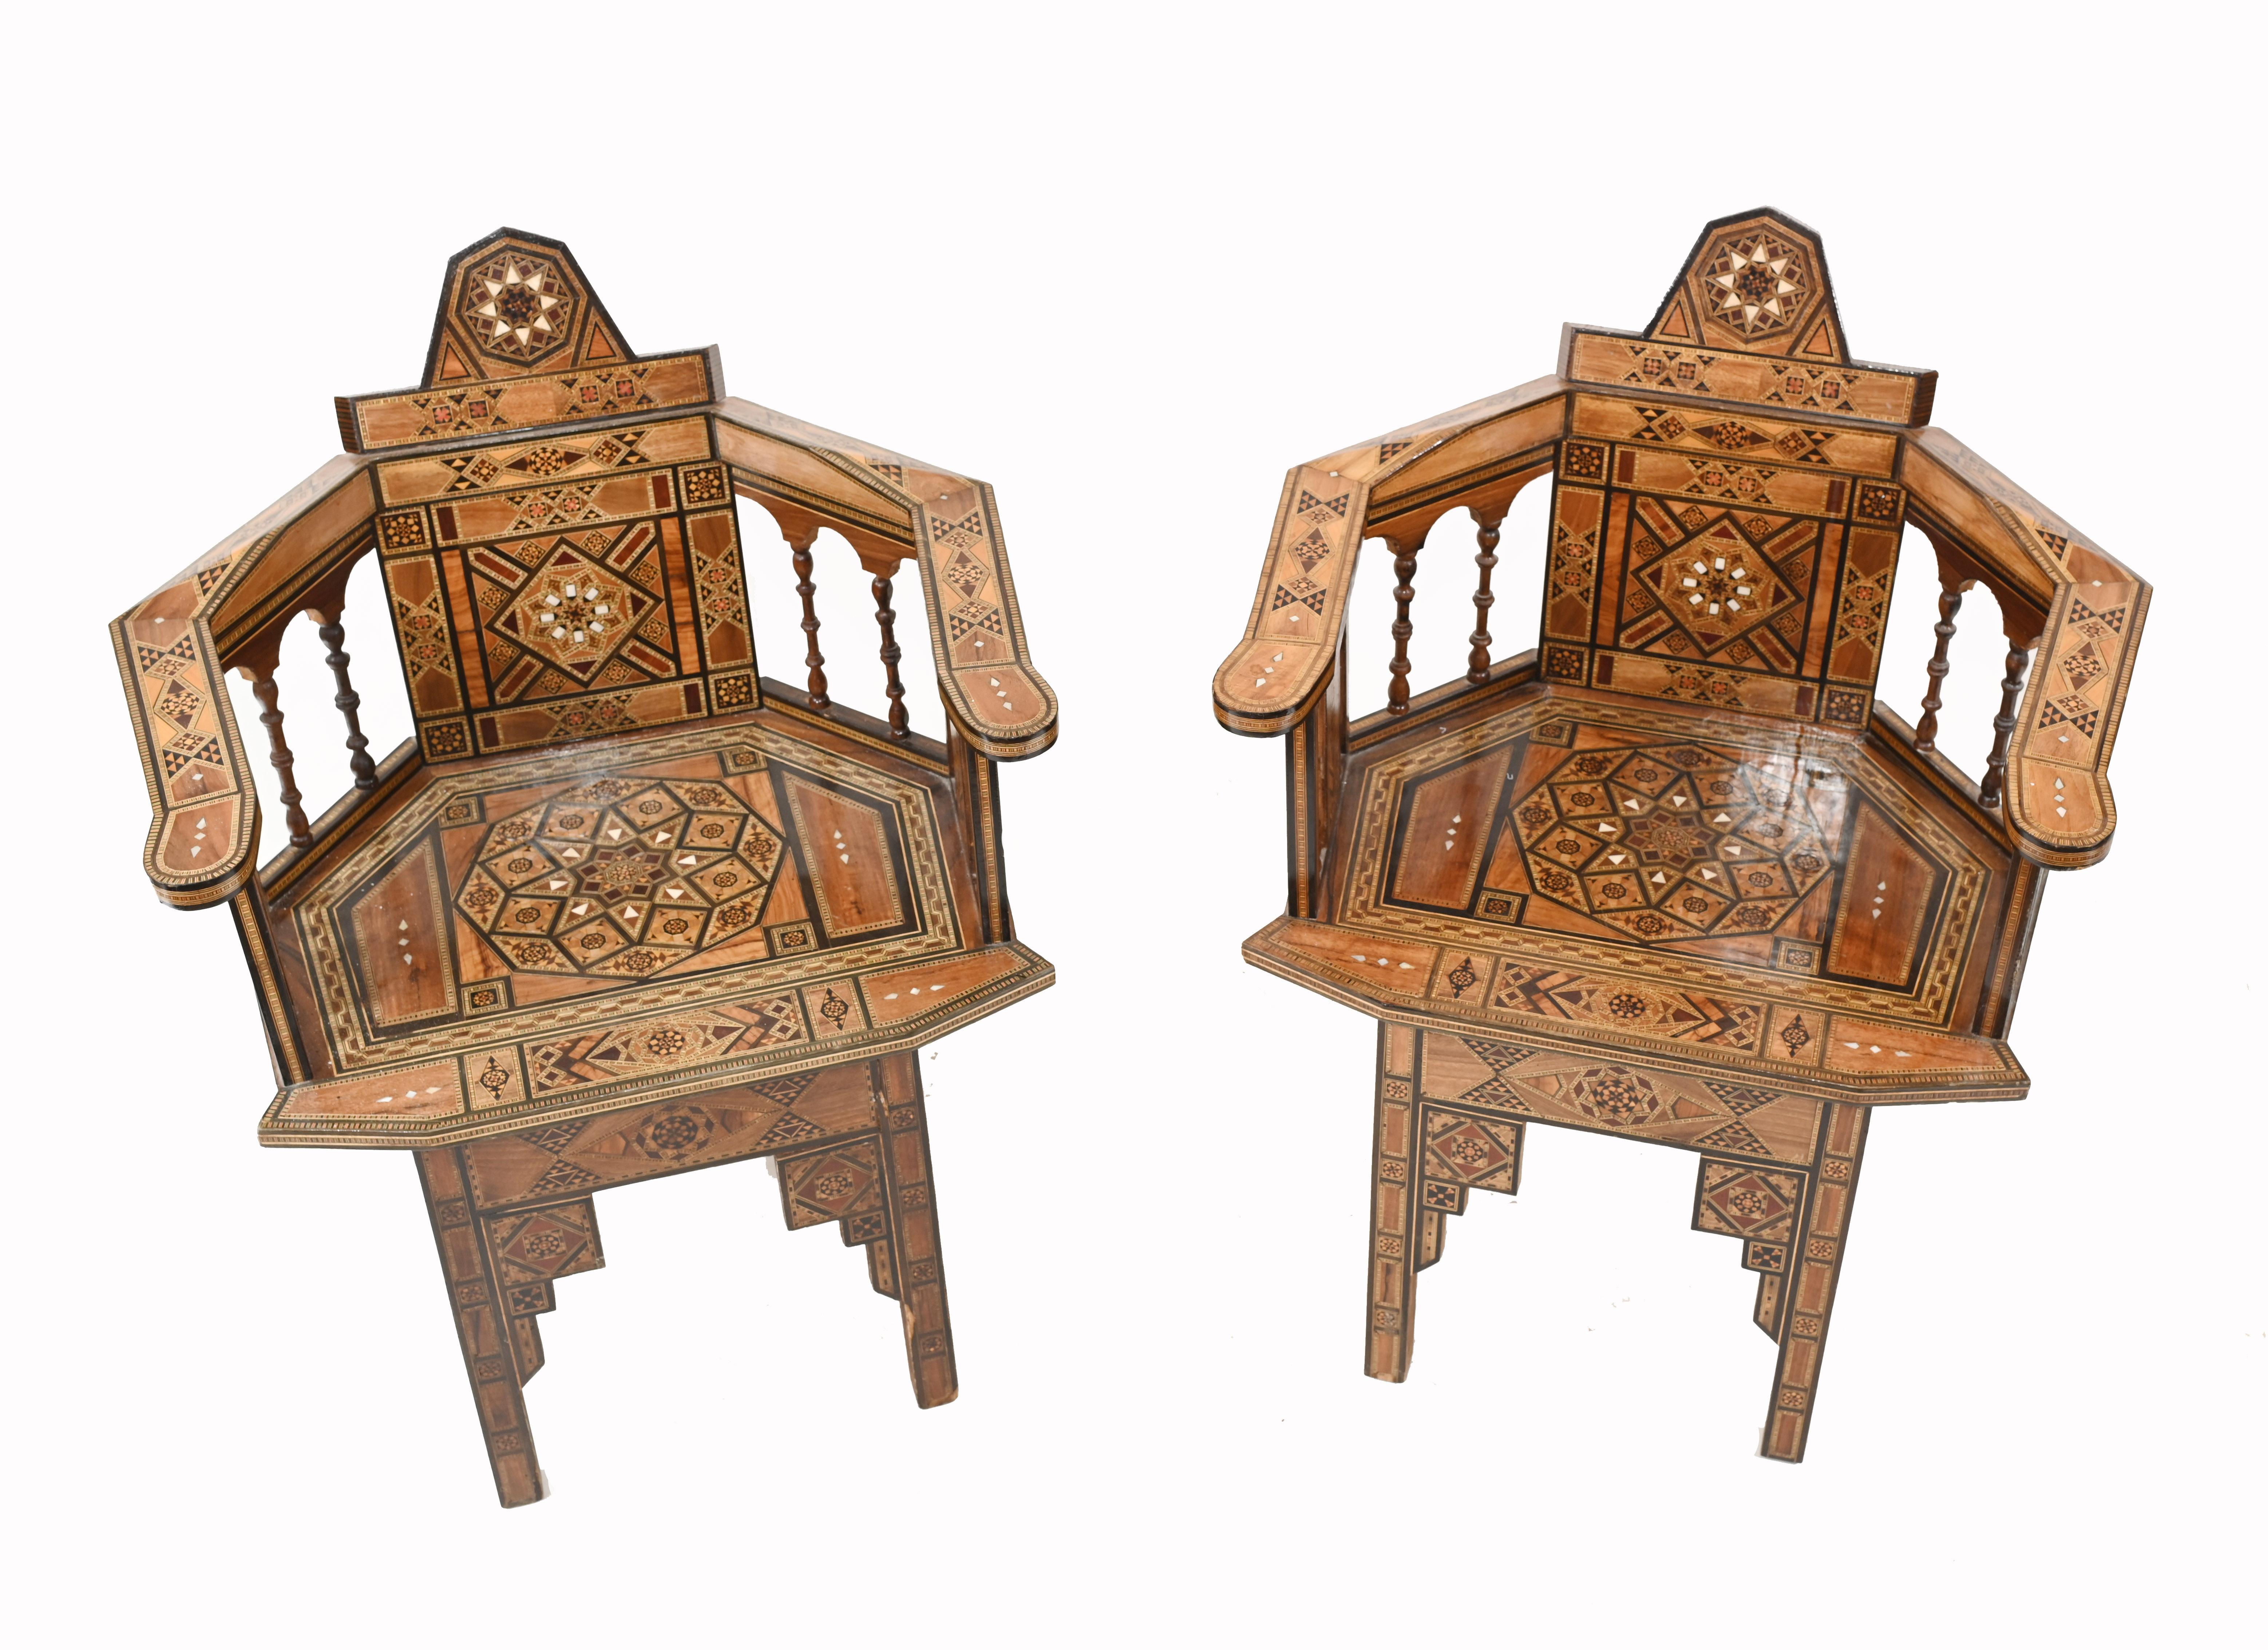 Gorgous pair of antique Damascan chairs
Intricate inlay work a hall marke of classic antique Syrian furniture
Great look, this is all the rage with interior designers

Some of our items are in storage so please check ahead of a viewing to see if